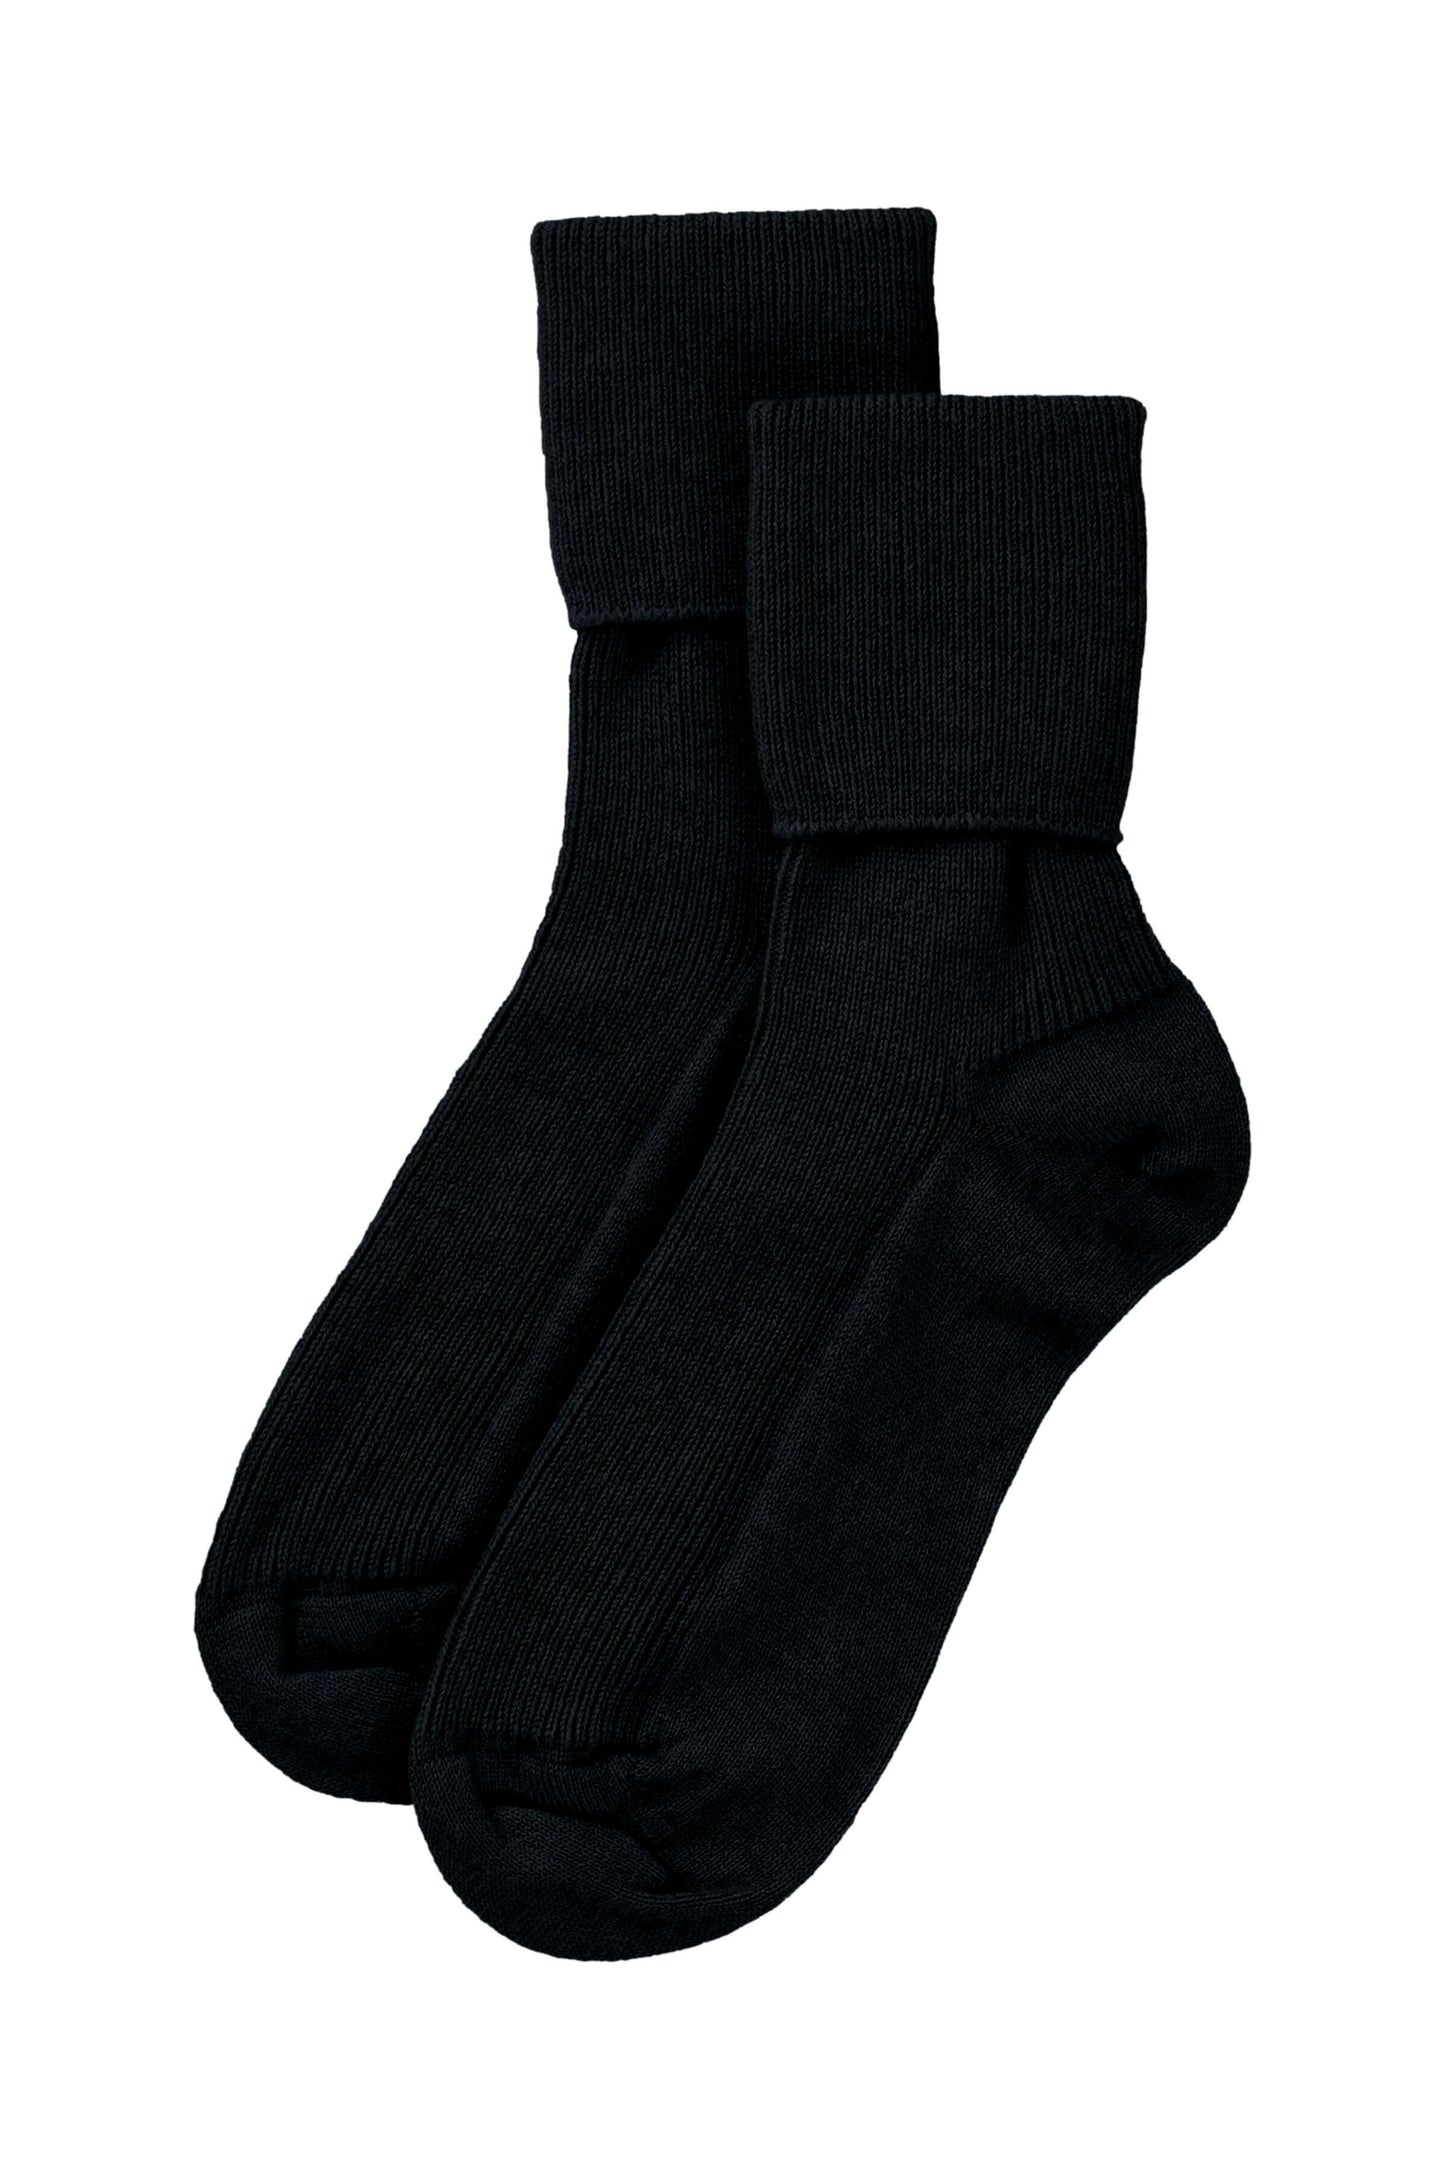 Johnstons of Elgin AW24 Knitted Accessory Black Women's Cashmere Socks HBN00007SA0900ONE